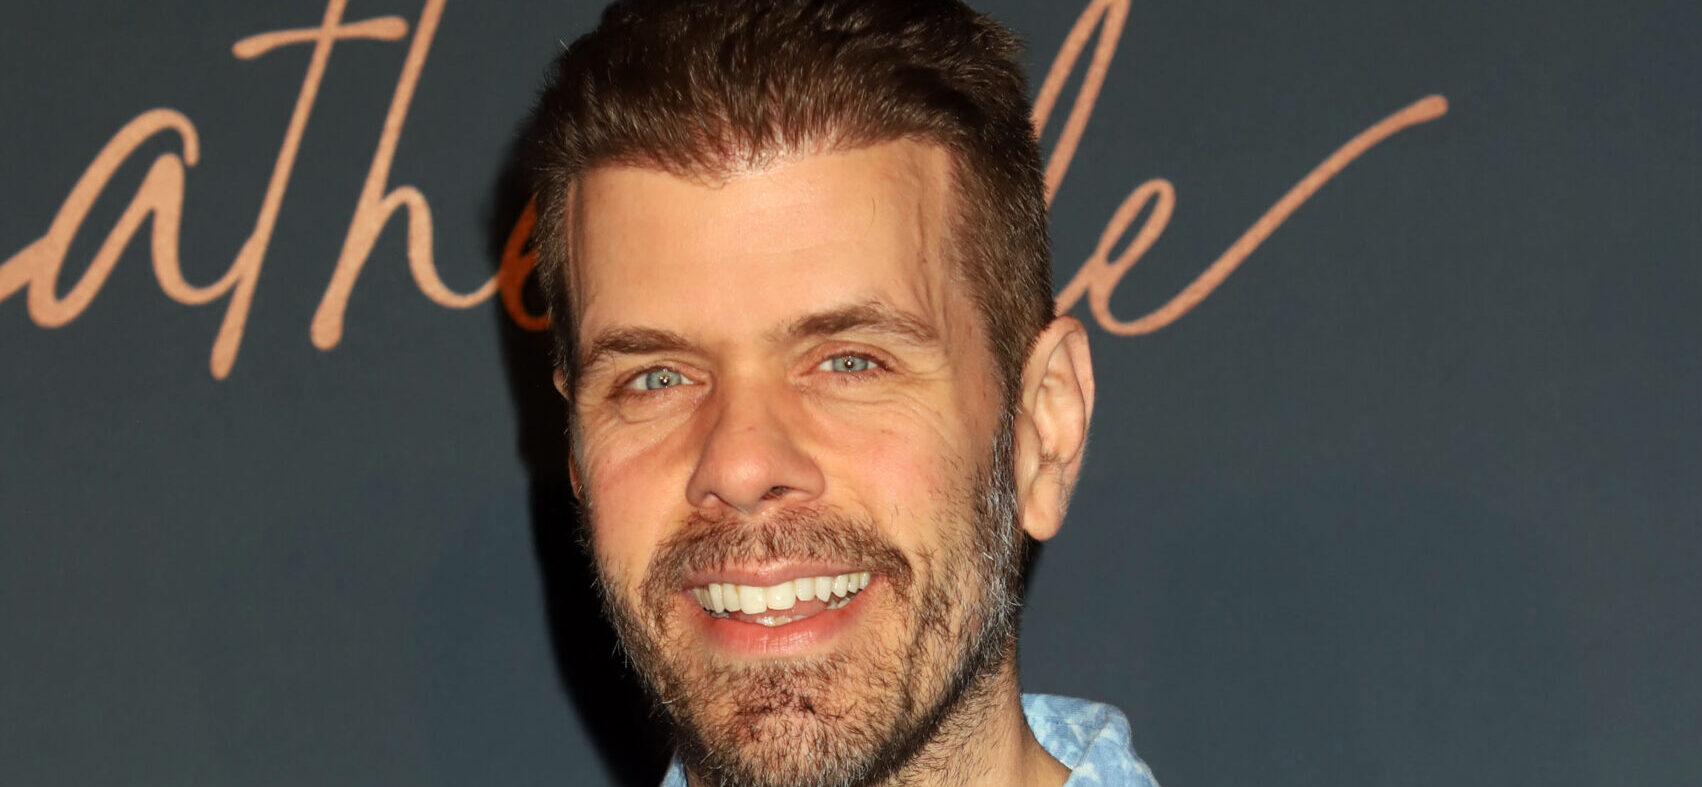 Perez Hilton On The Hunt For Bombshell Interview With THIS Mysterious Celebrity!